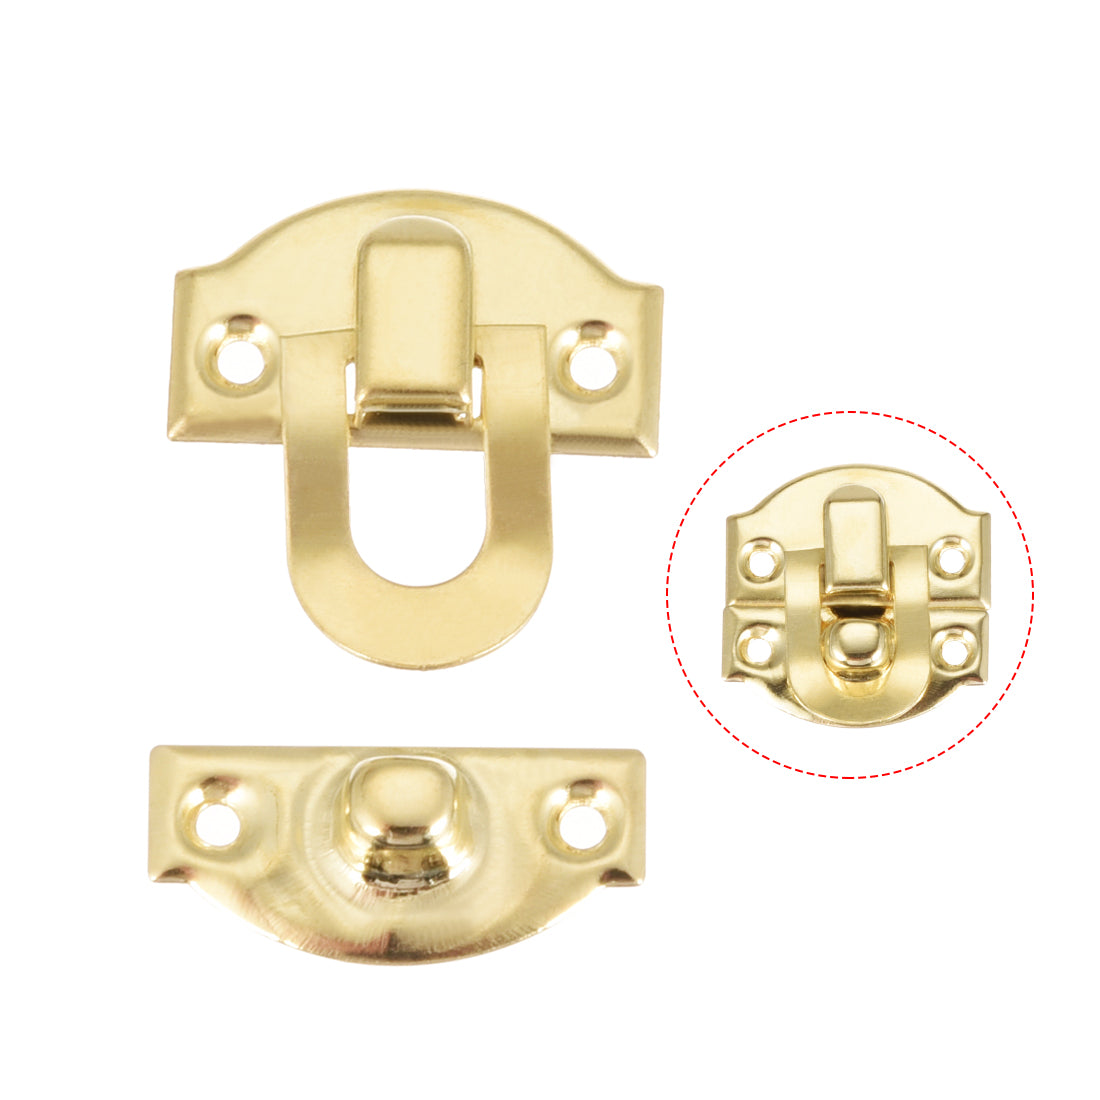 uxcell Uxcell Box Latch, Retro Style Small Size Golden Decorative Hasp Jewelry cases Catch w Screws 2 pcs